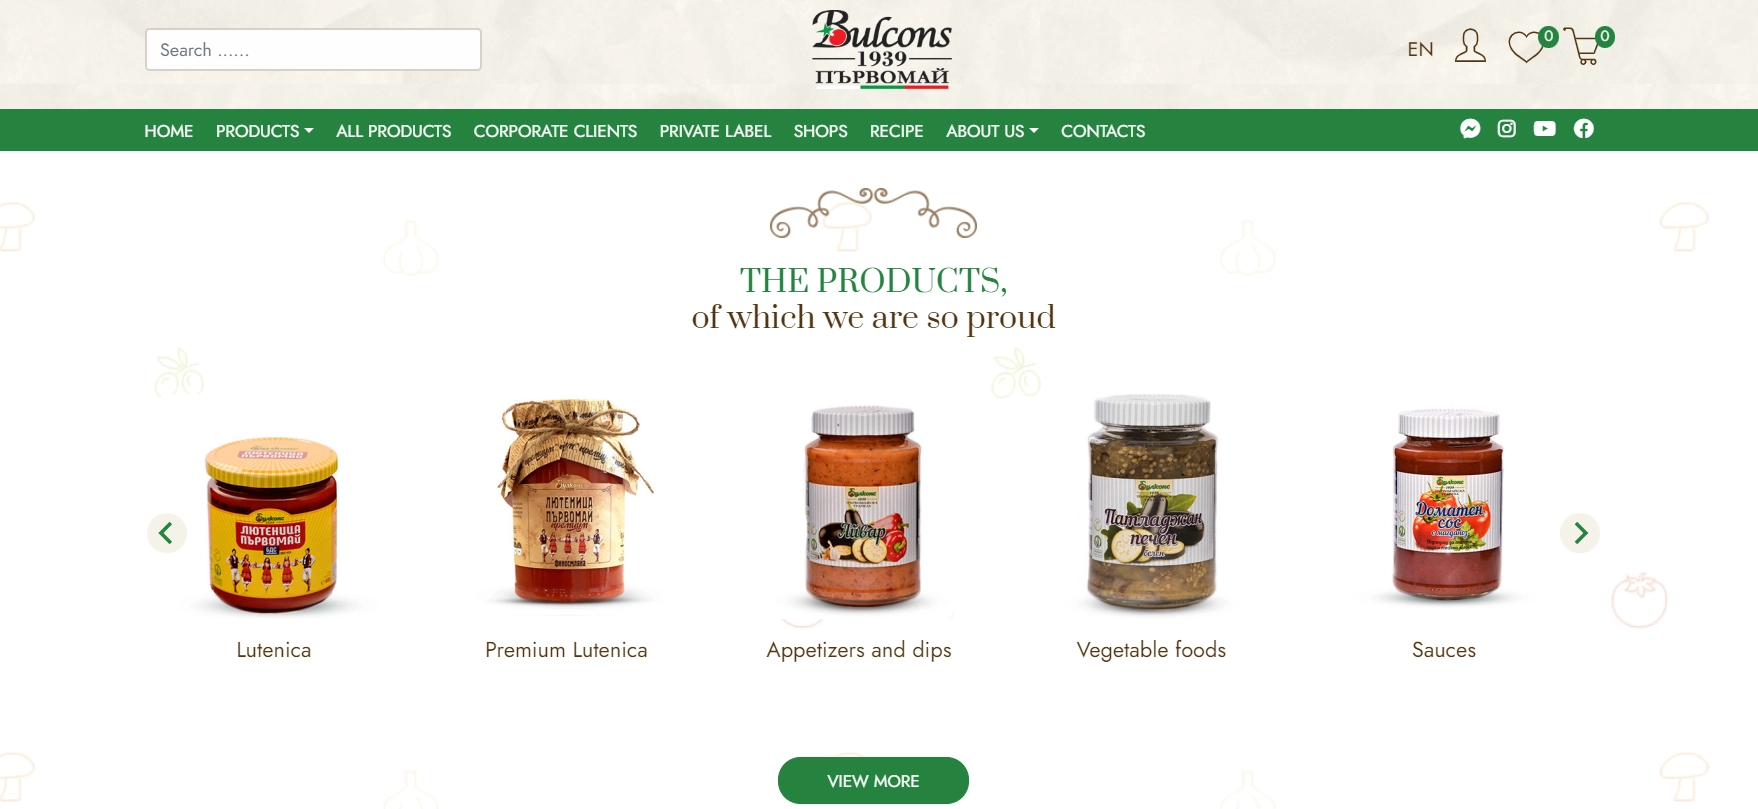 The homepage of Bulcons ecommerce platform, displaying their variety of products